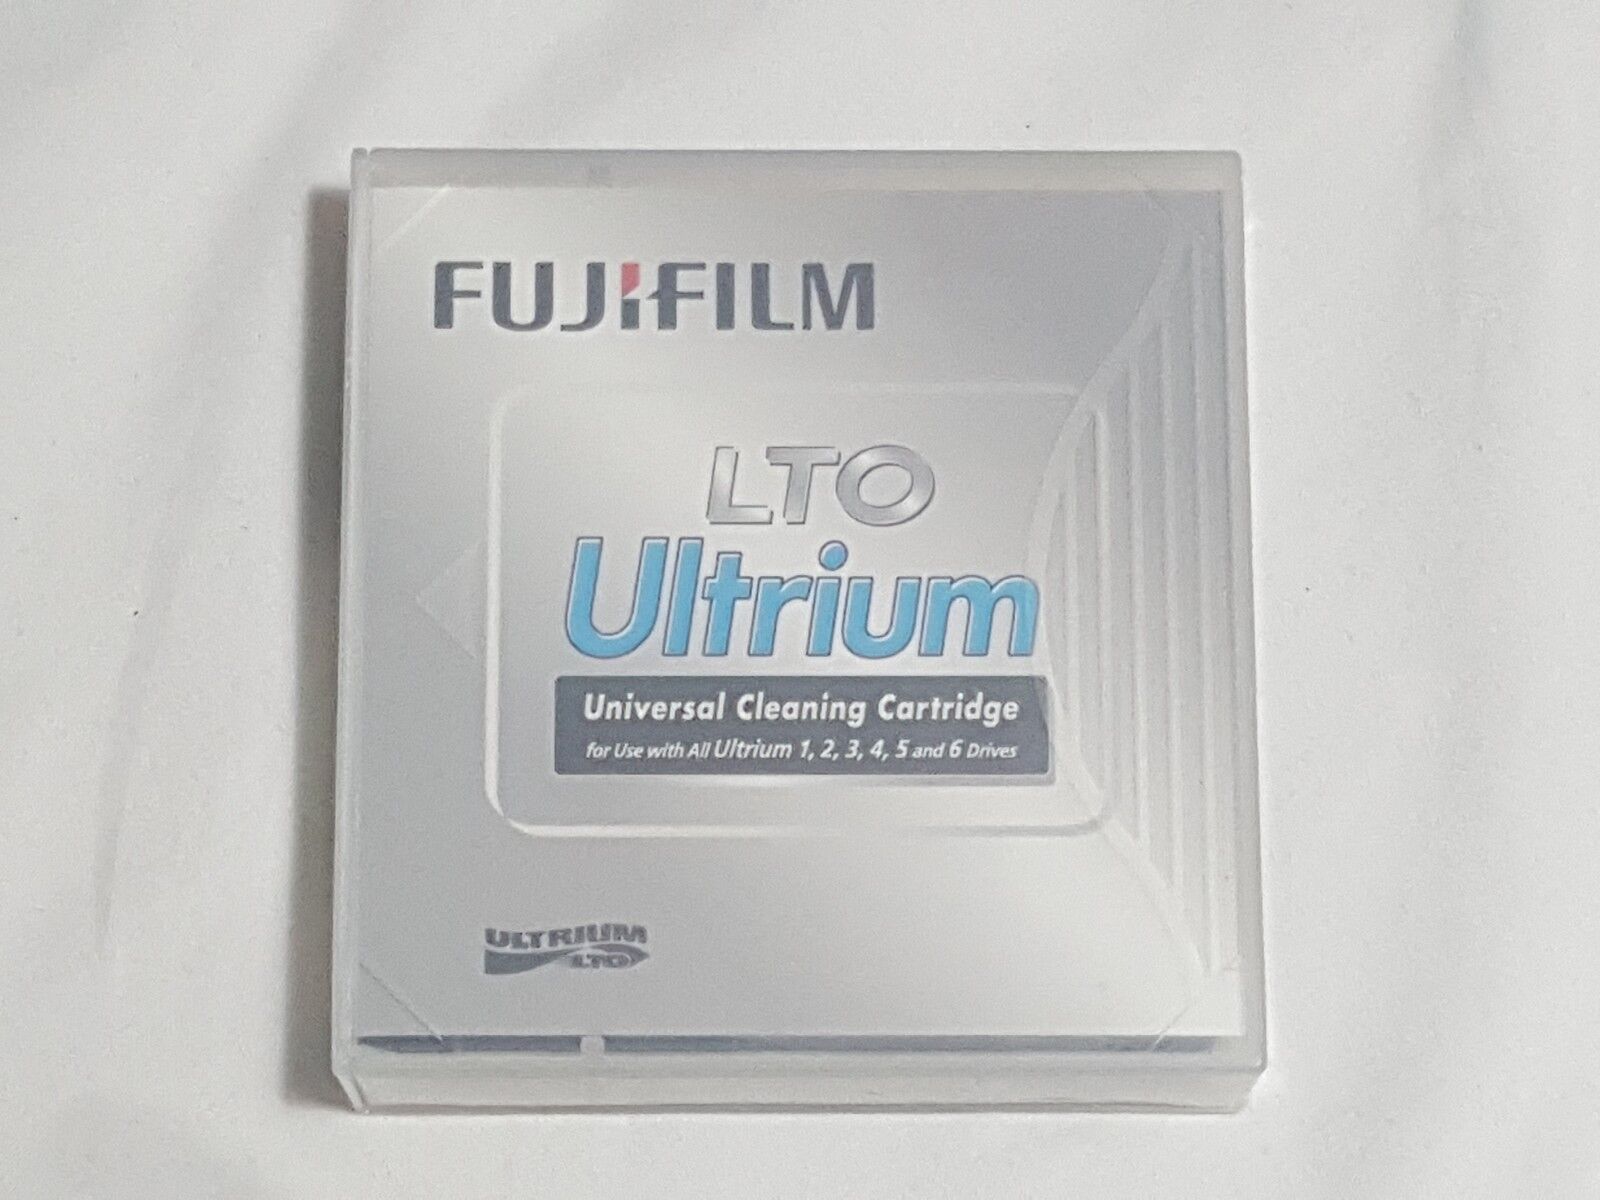 NEW Fujifilm LTO Ultrium Universal Cleaning Cartridge for Drive 1 2 3 4 5 & 6